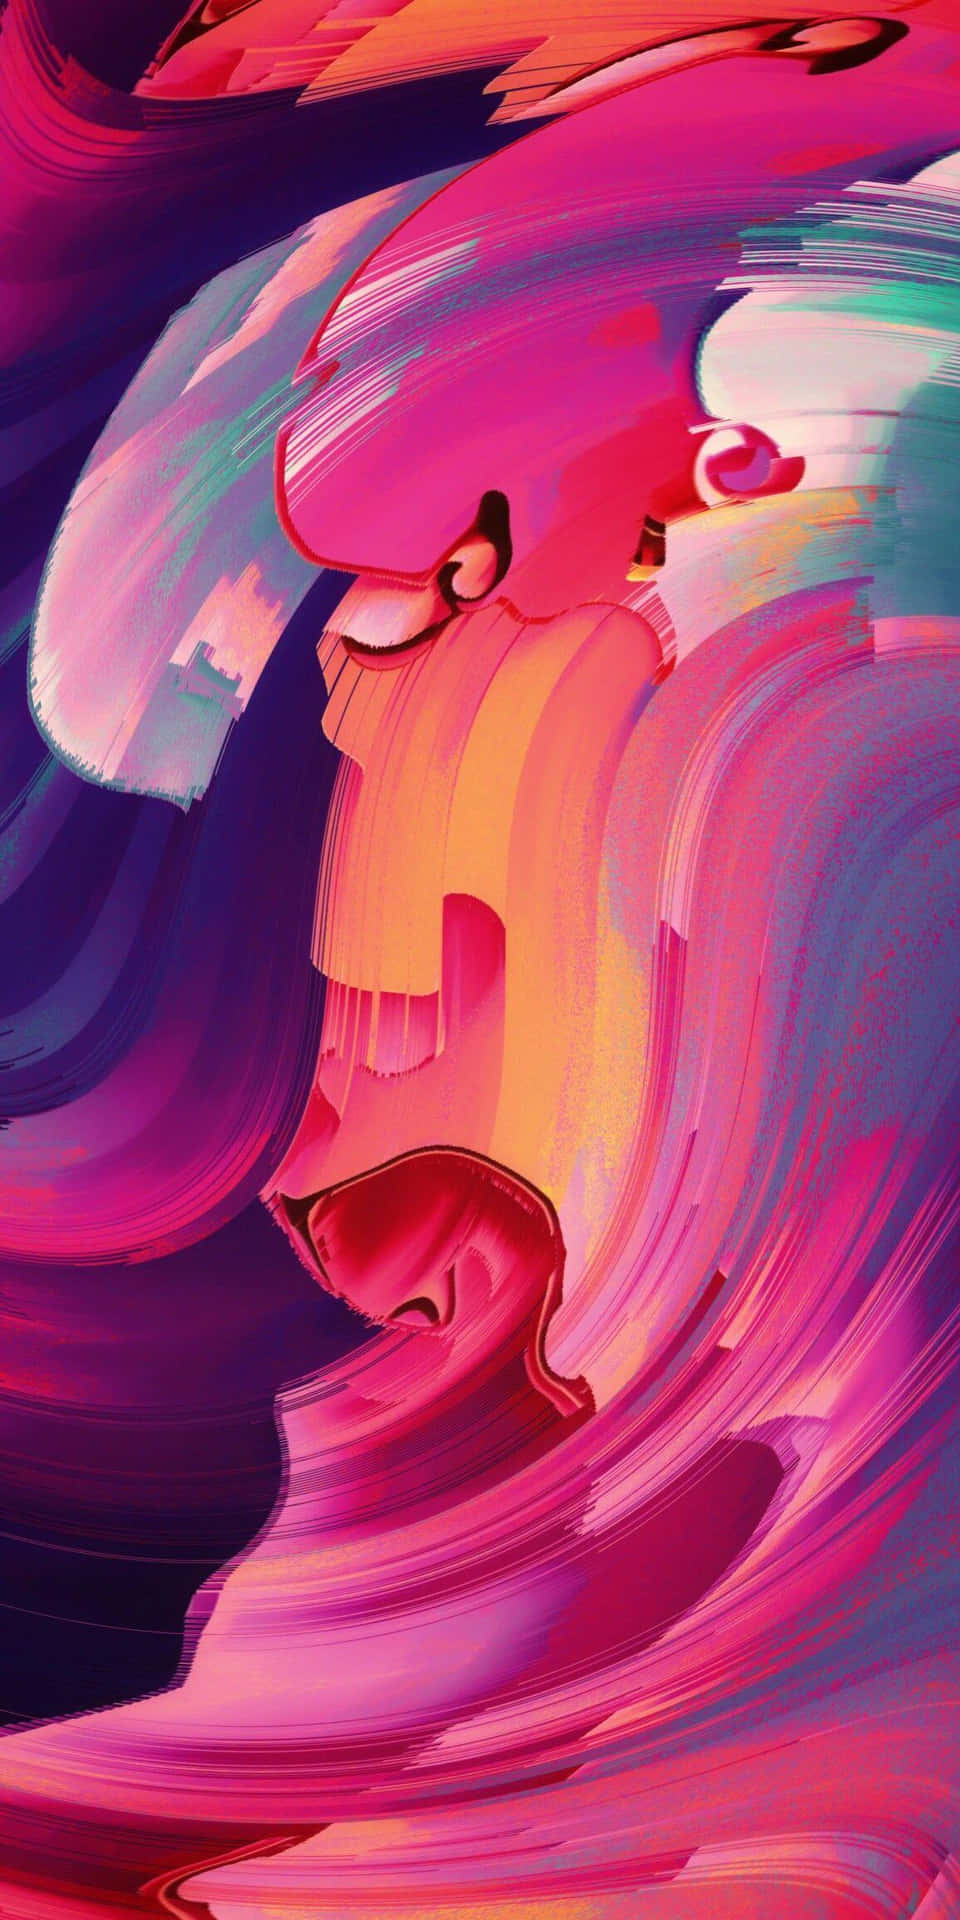 Stunning Trendy iPhone with Vibrant Display Wallpaper